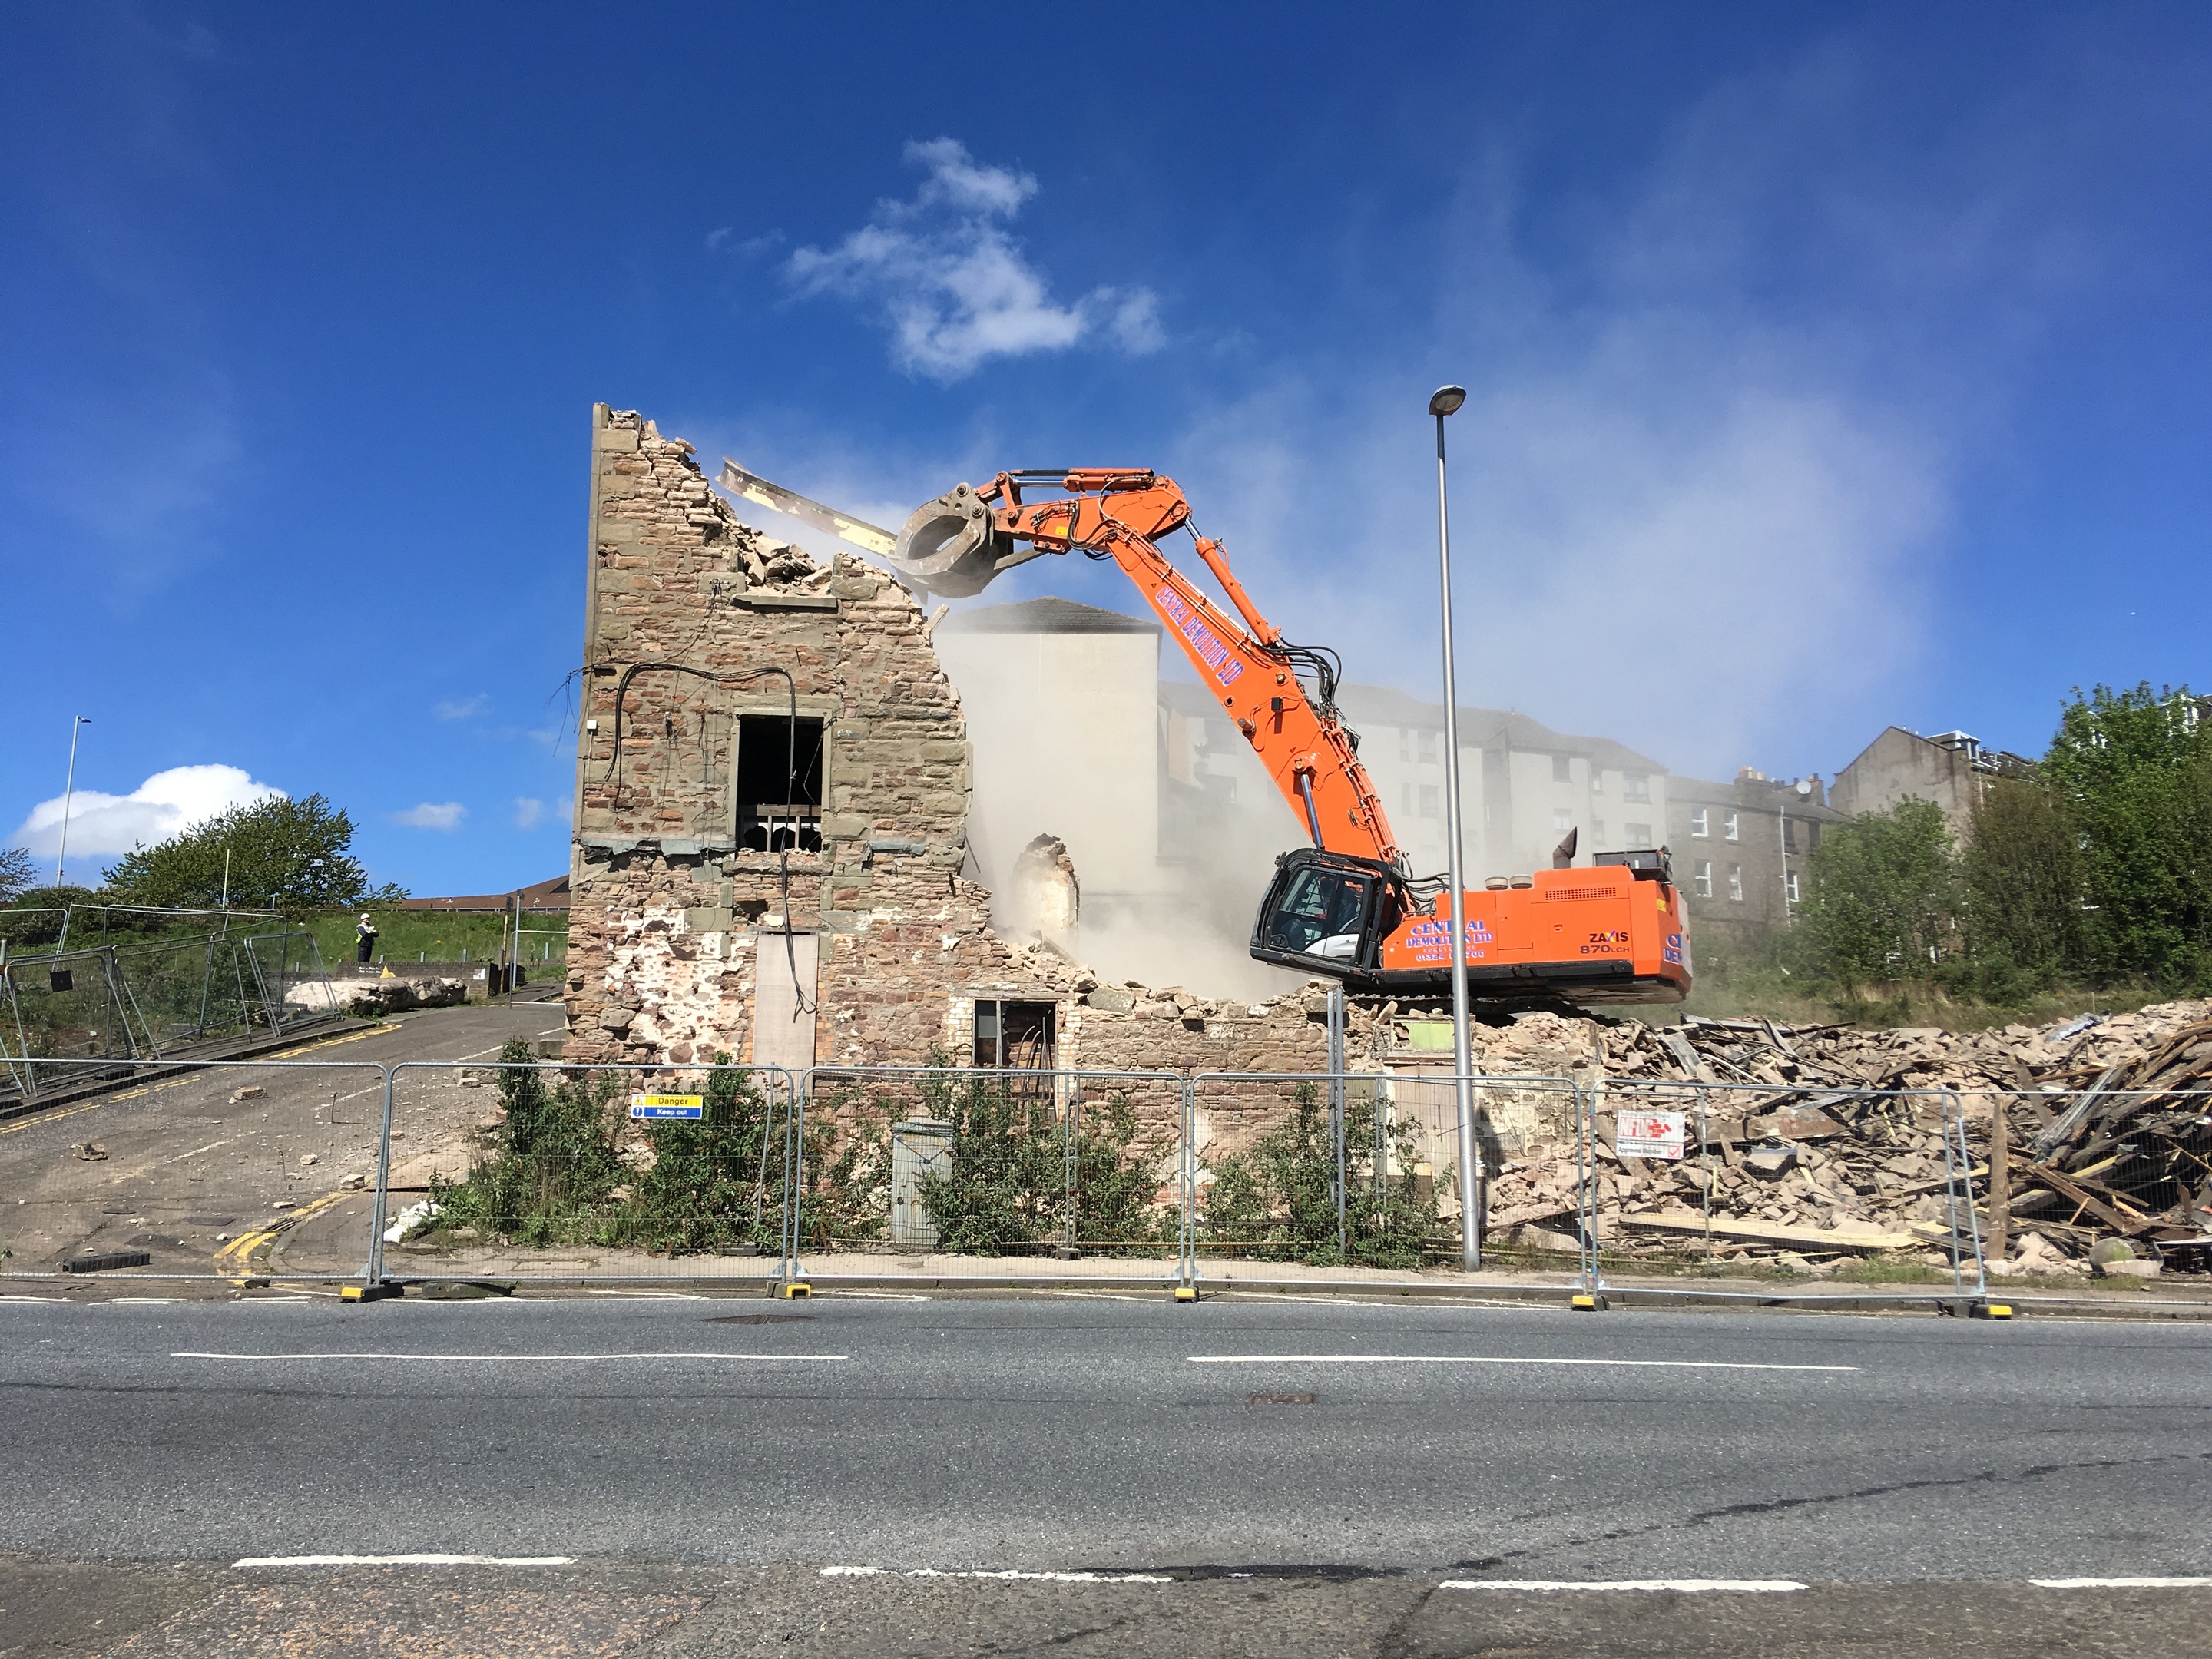 The demolition work being concluded on Saturday May 13.